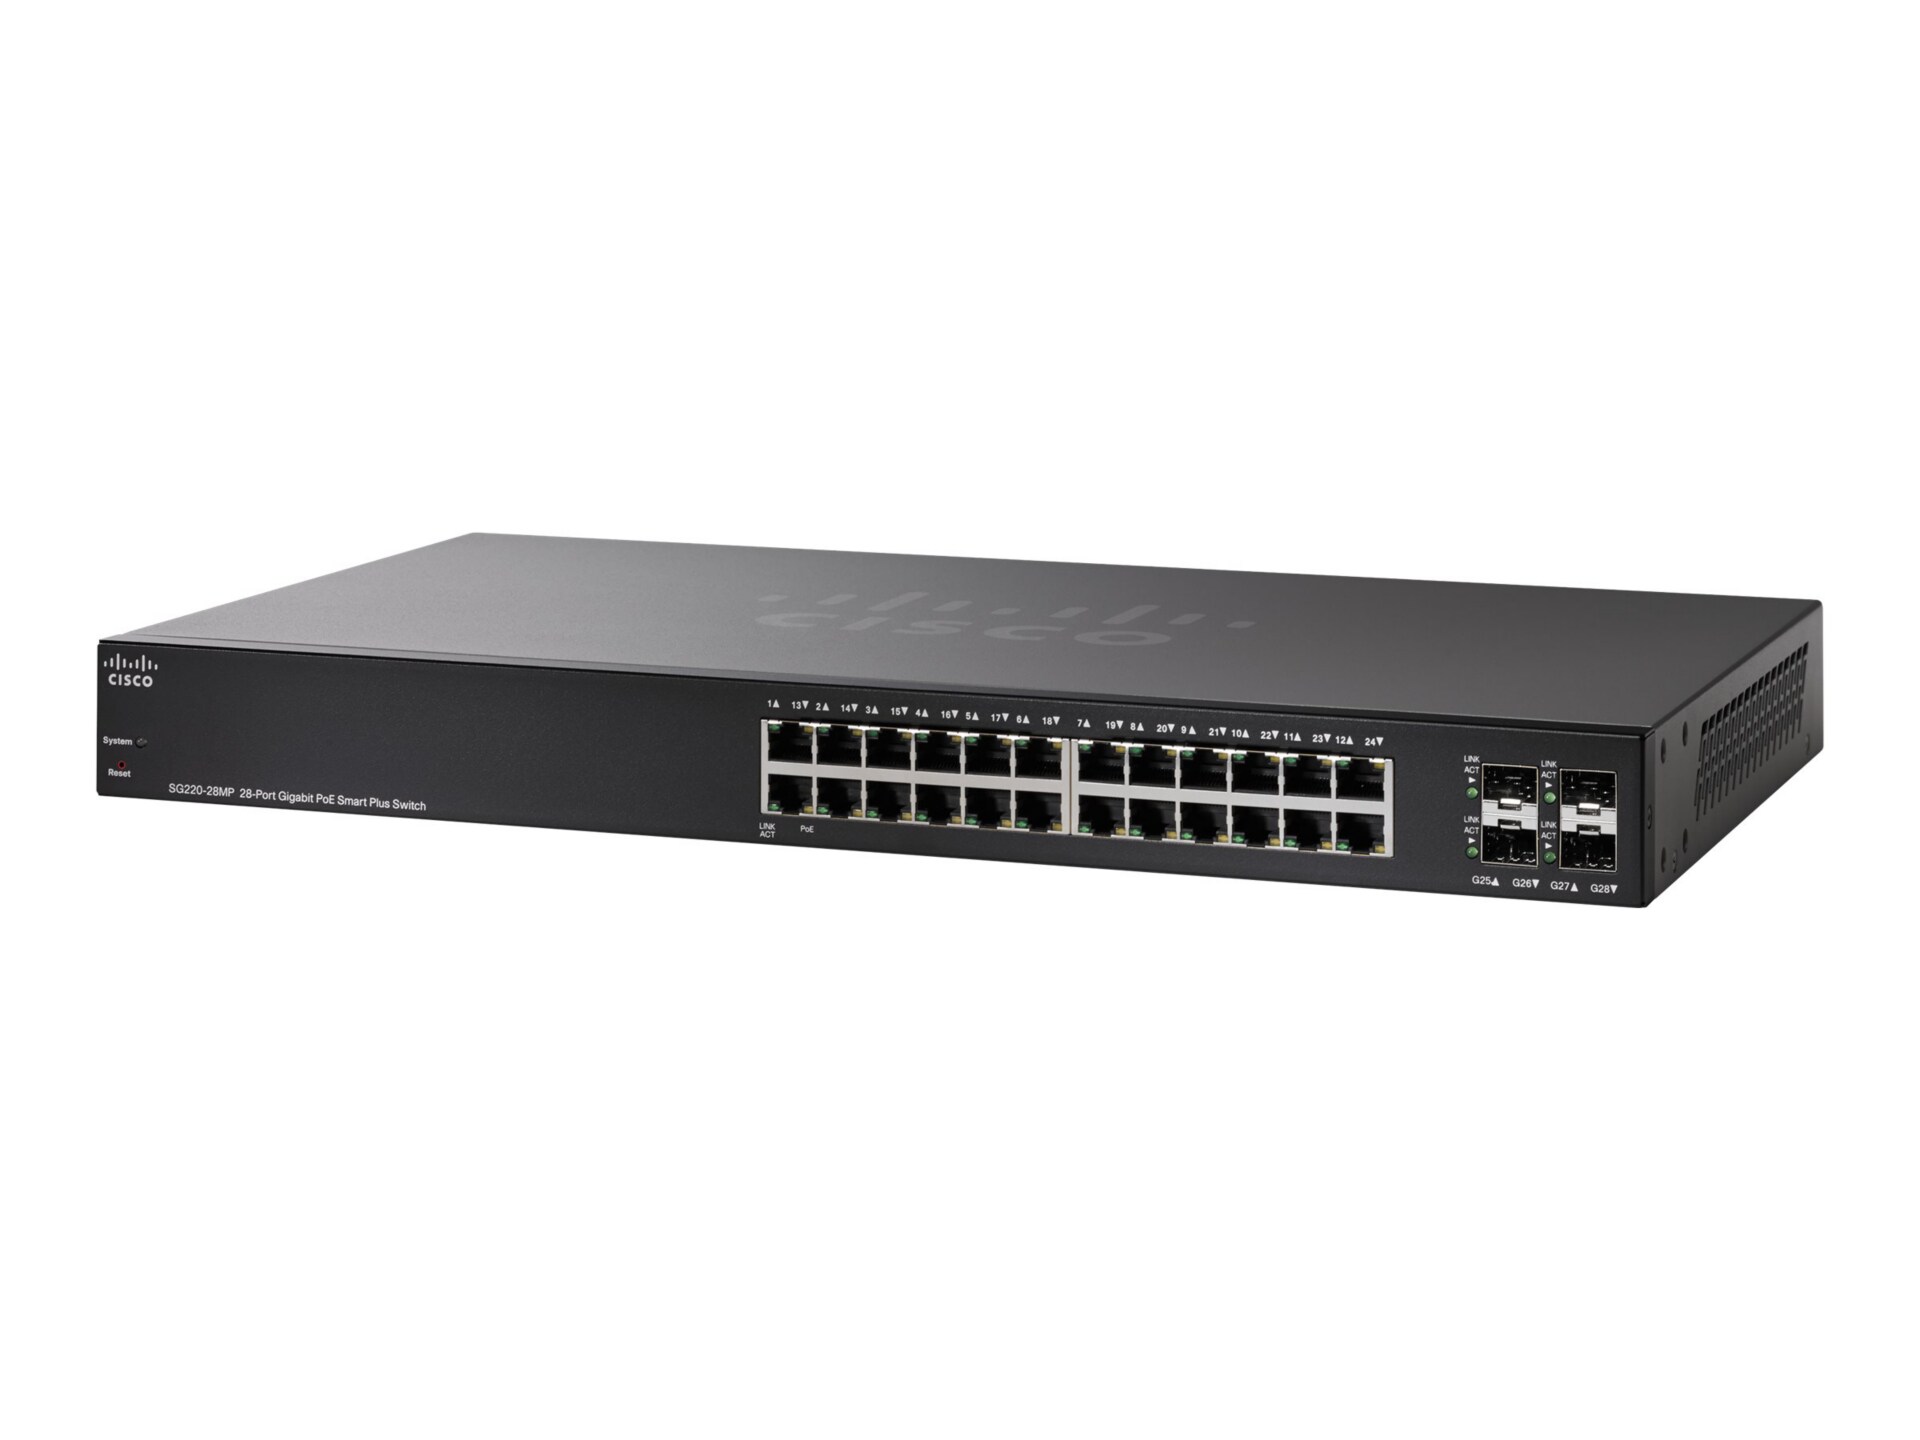 Cisco 220 Series SG220-28MP - switch - 28 ports - managed - rack-mountable